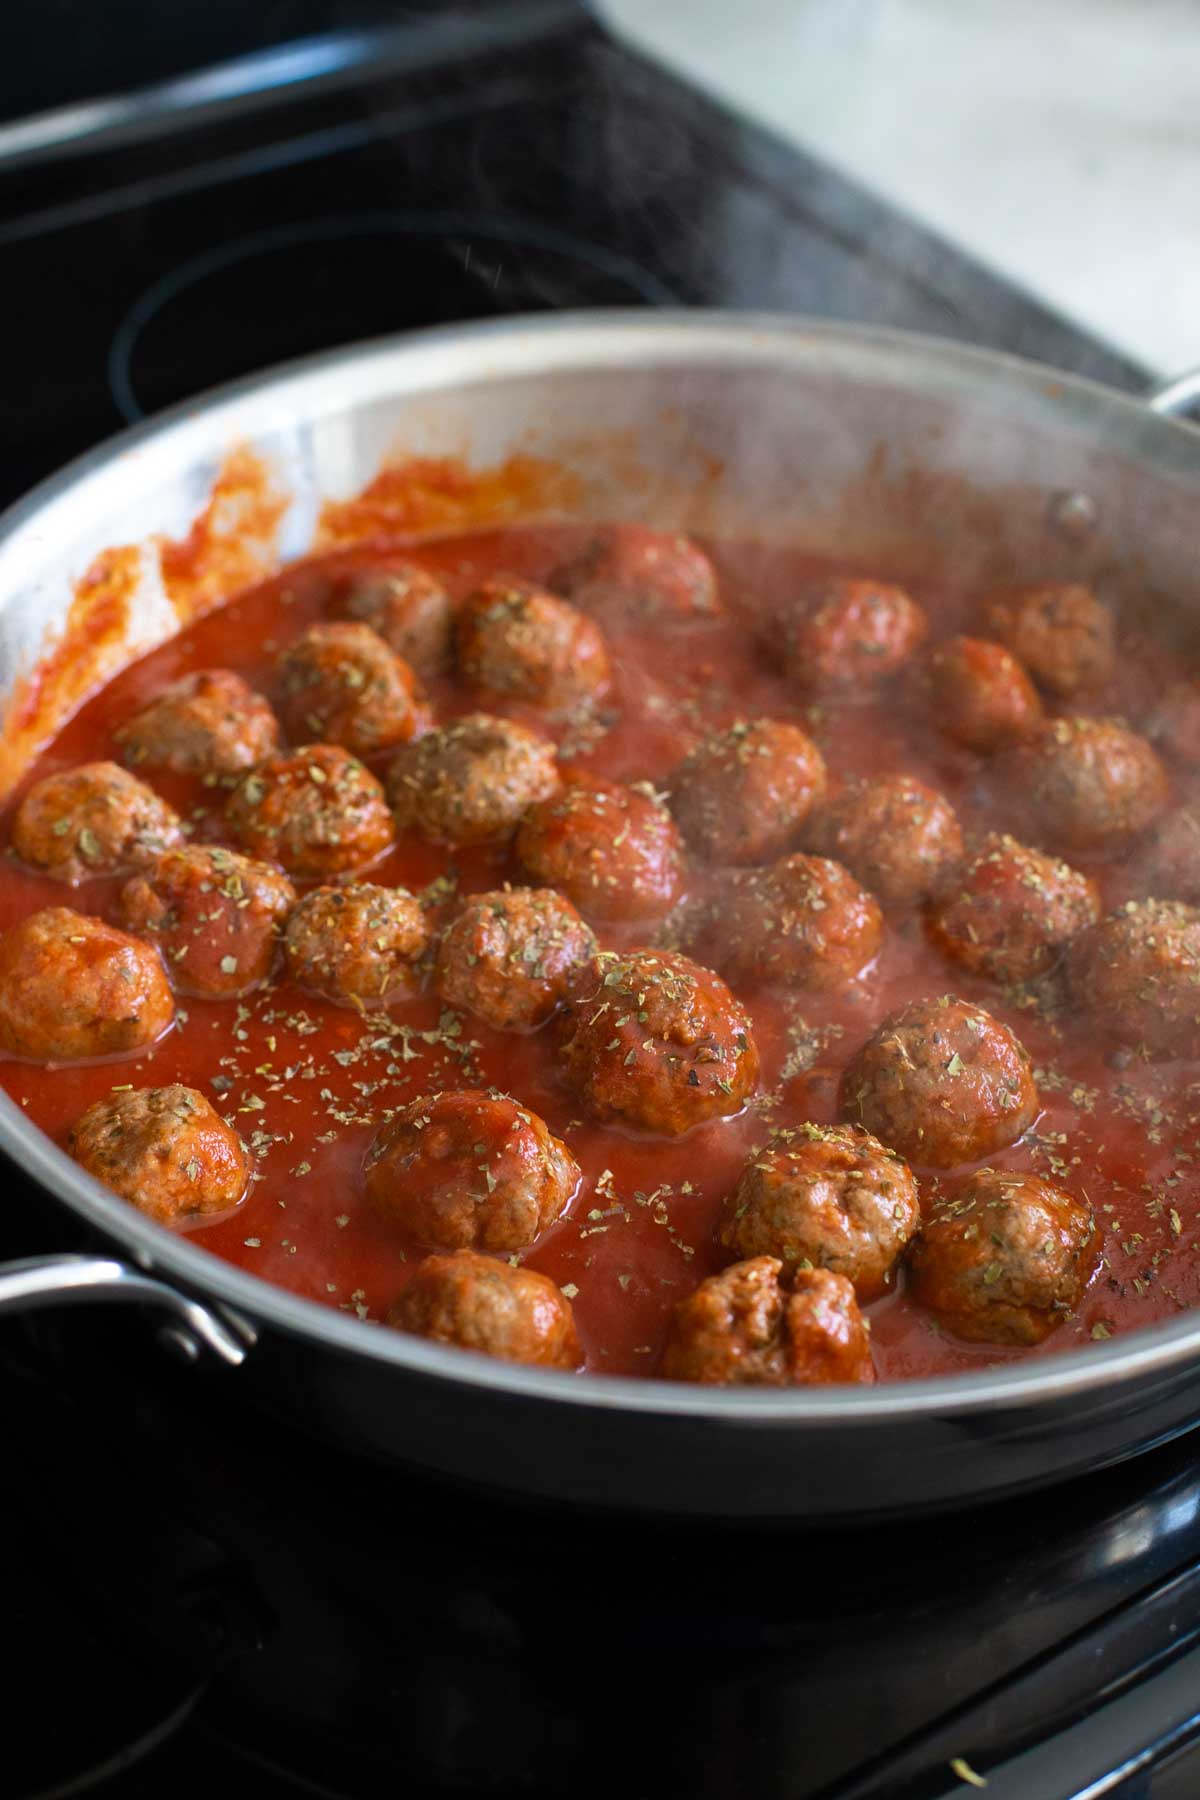 The meatballs are cooking in the tomato sauce and steam is rising up.